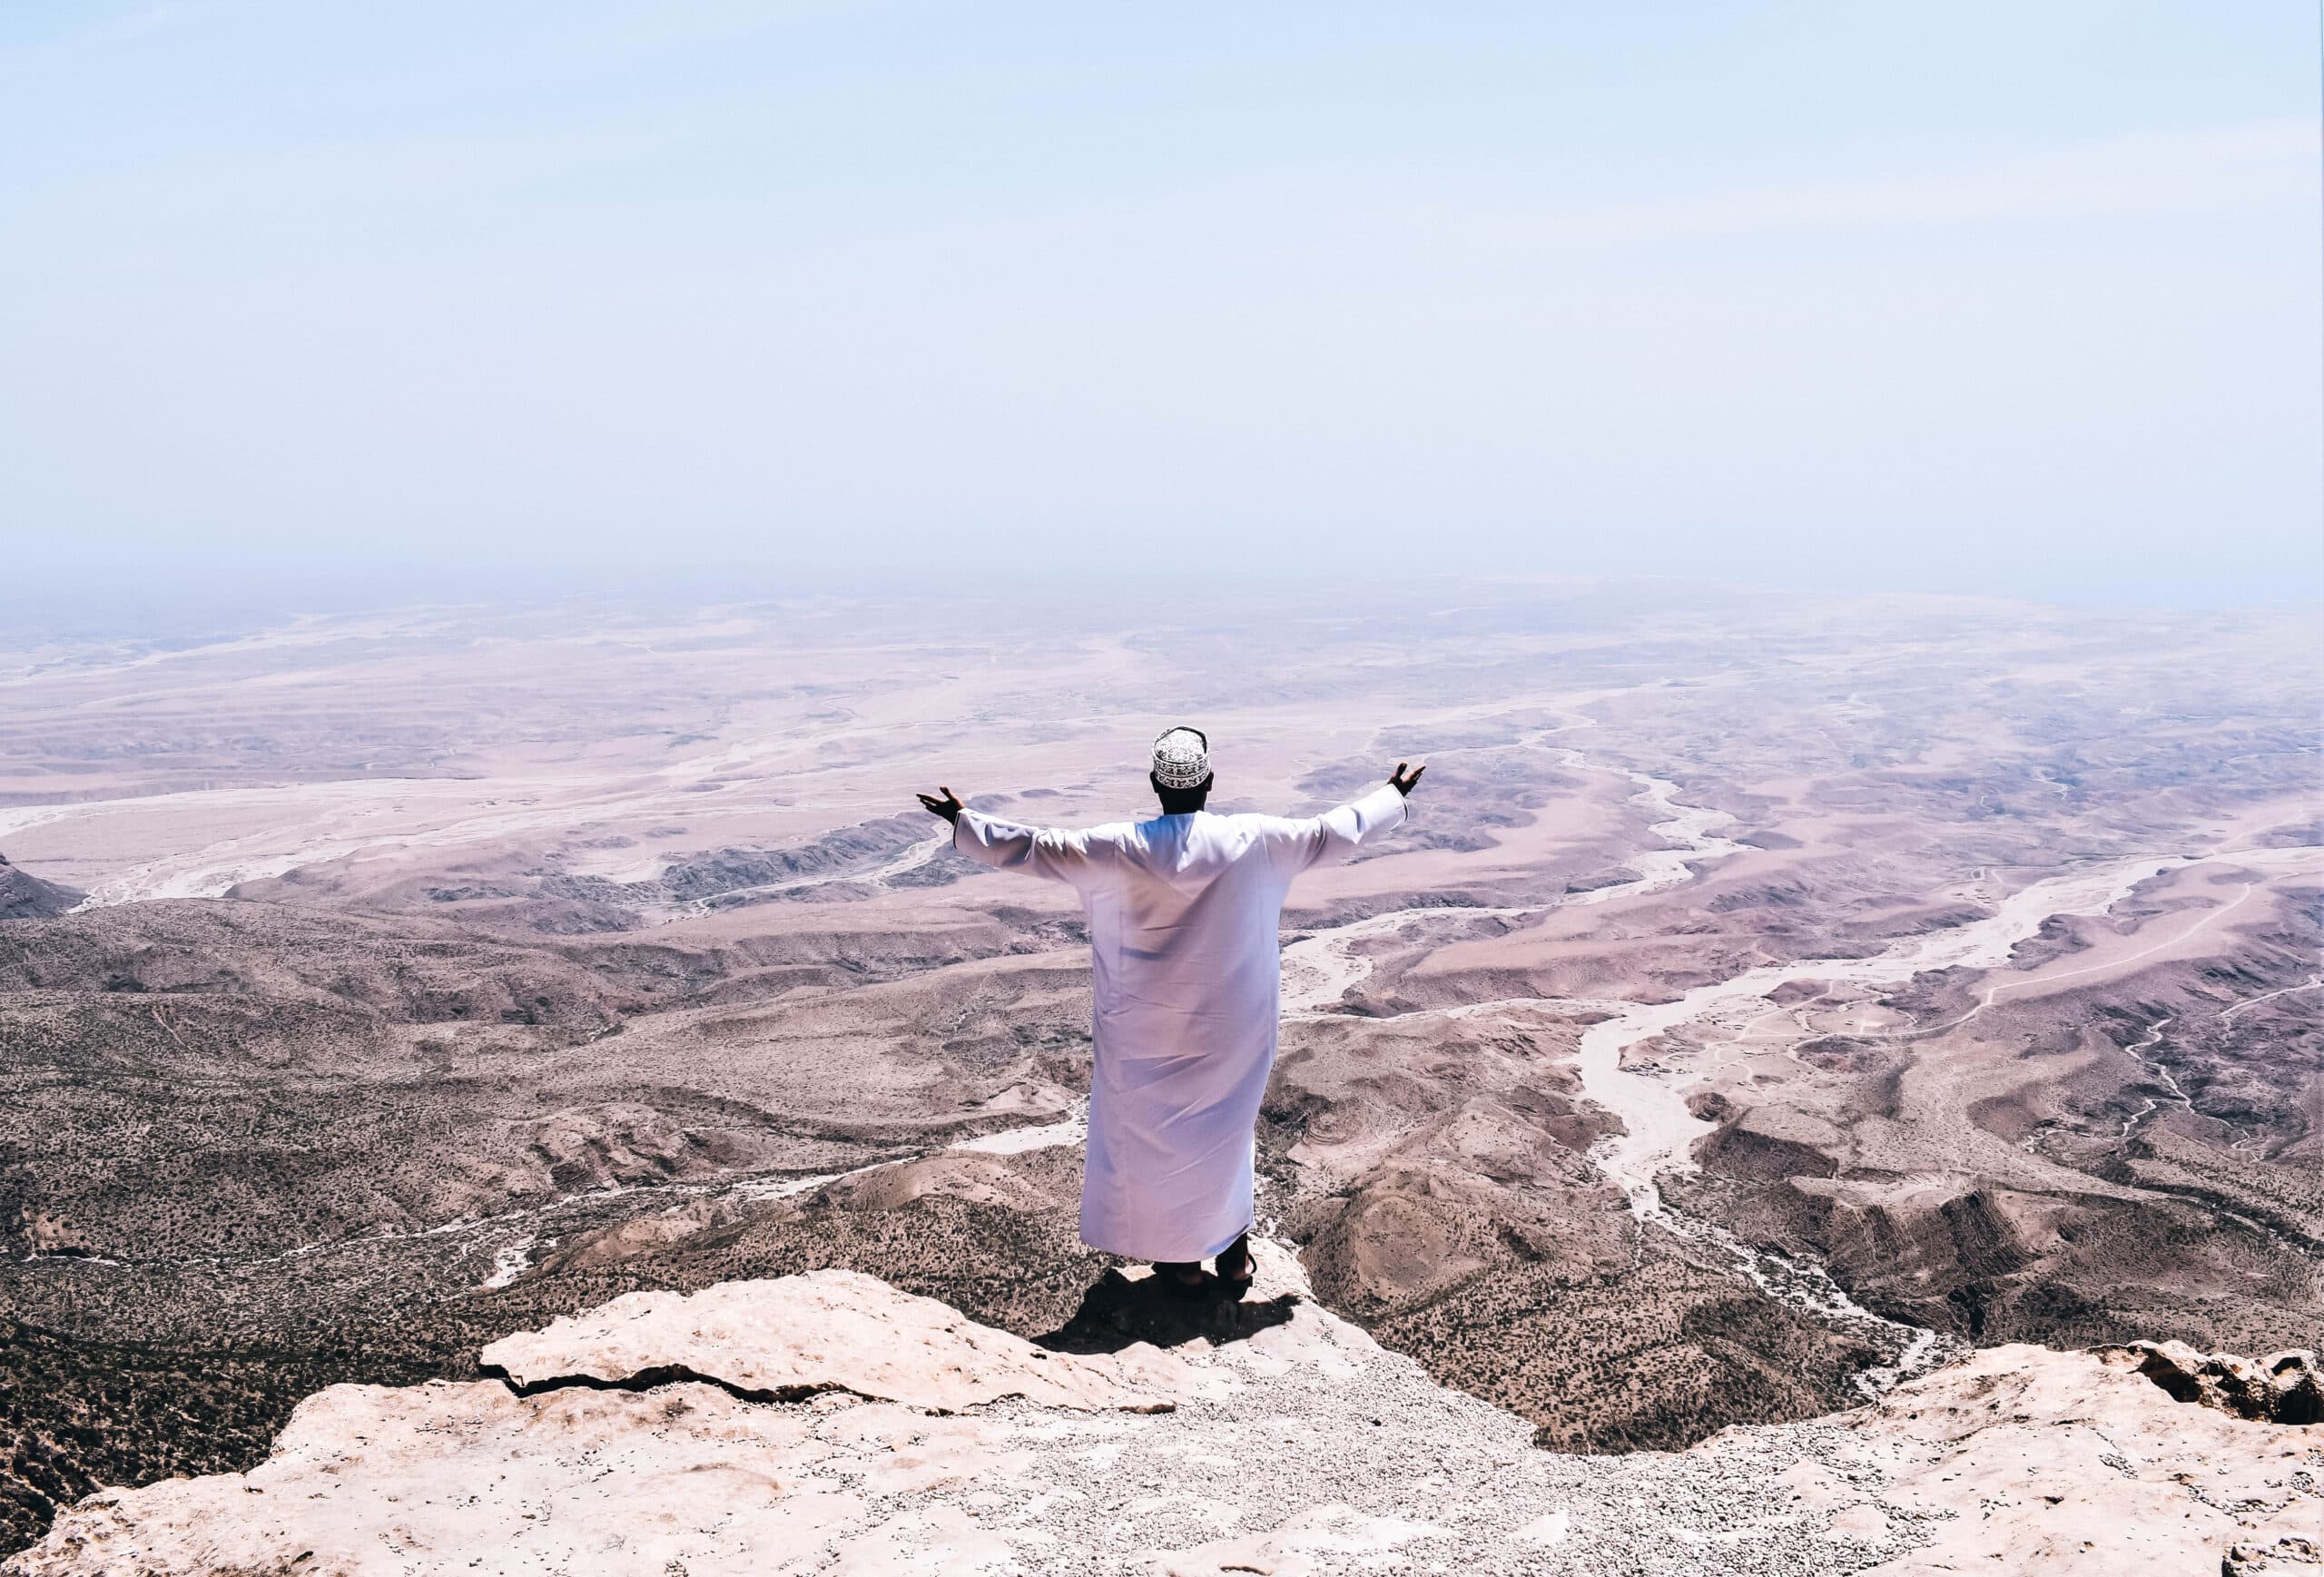 Planning a holiday to Oman involves taking a look at and embracing the whole country, like this man is from the mountains